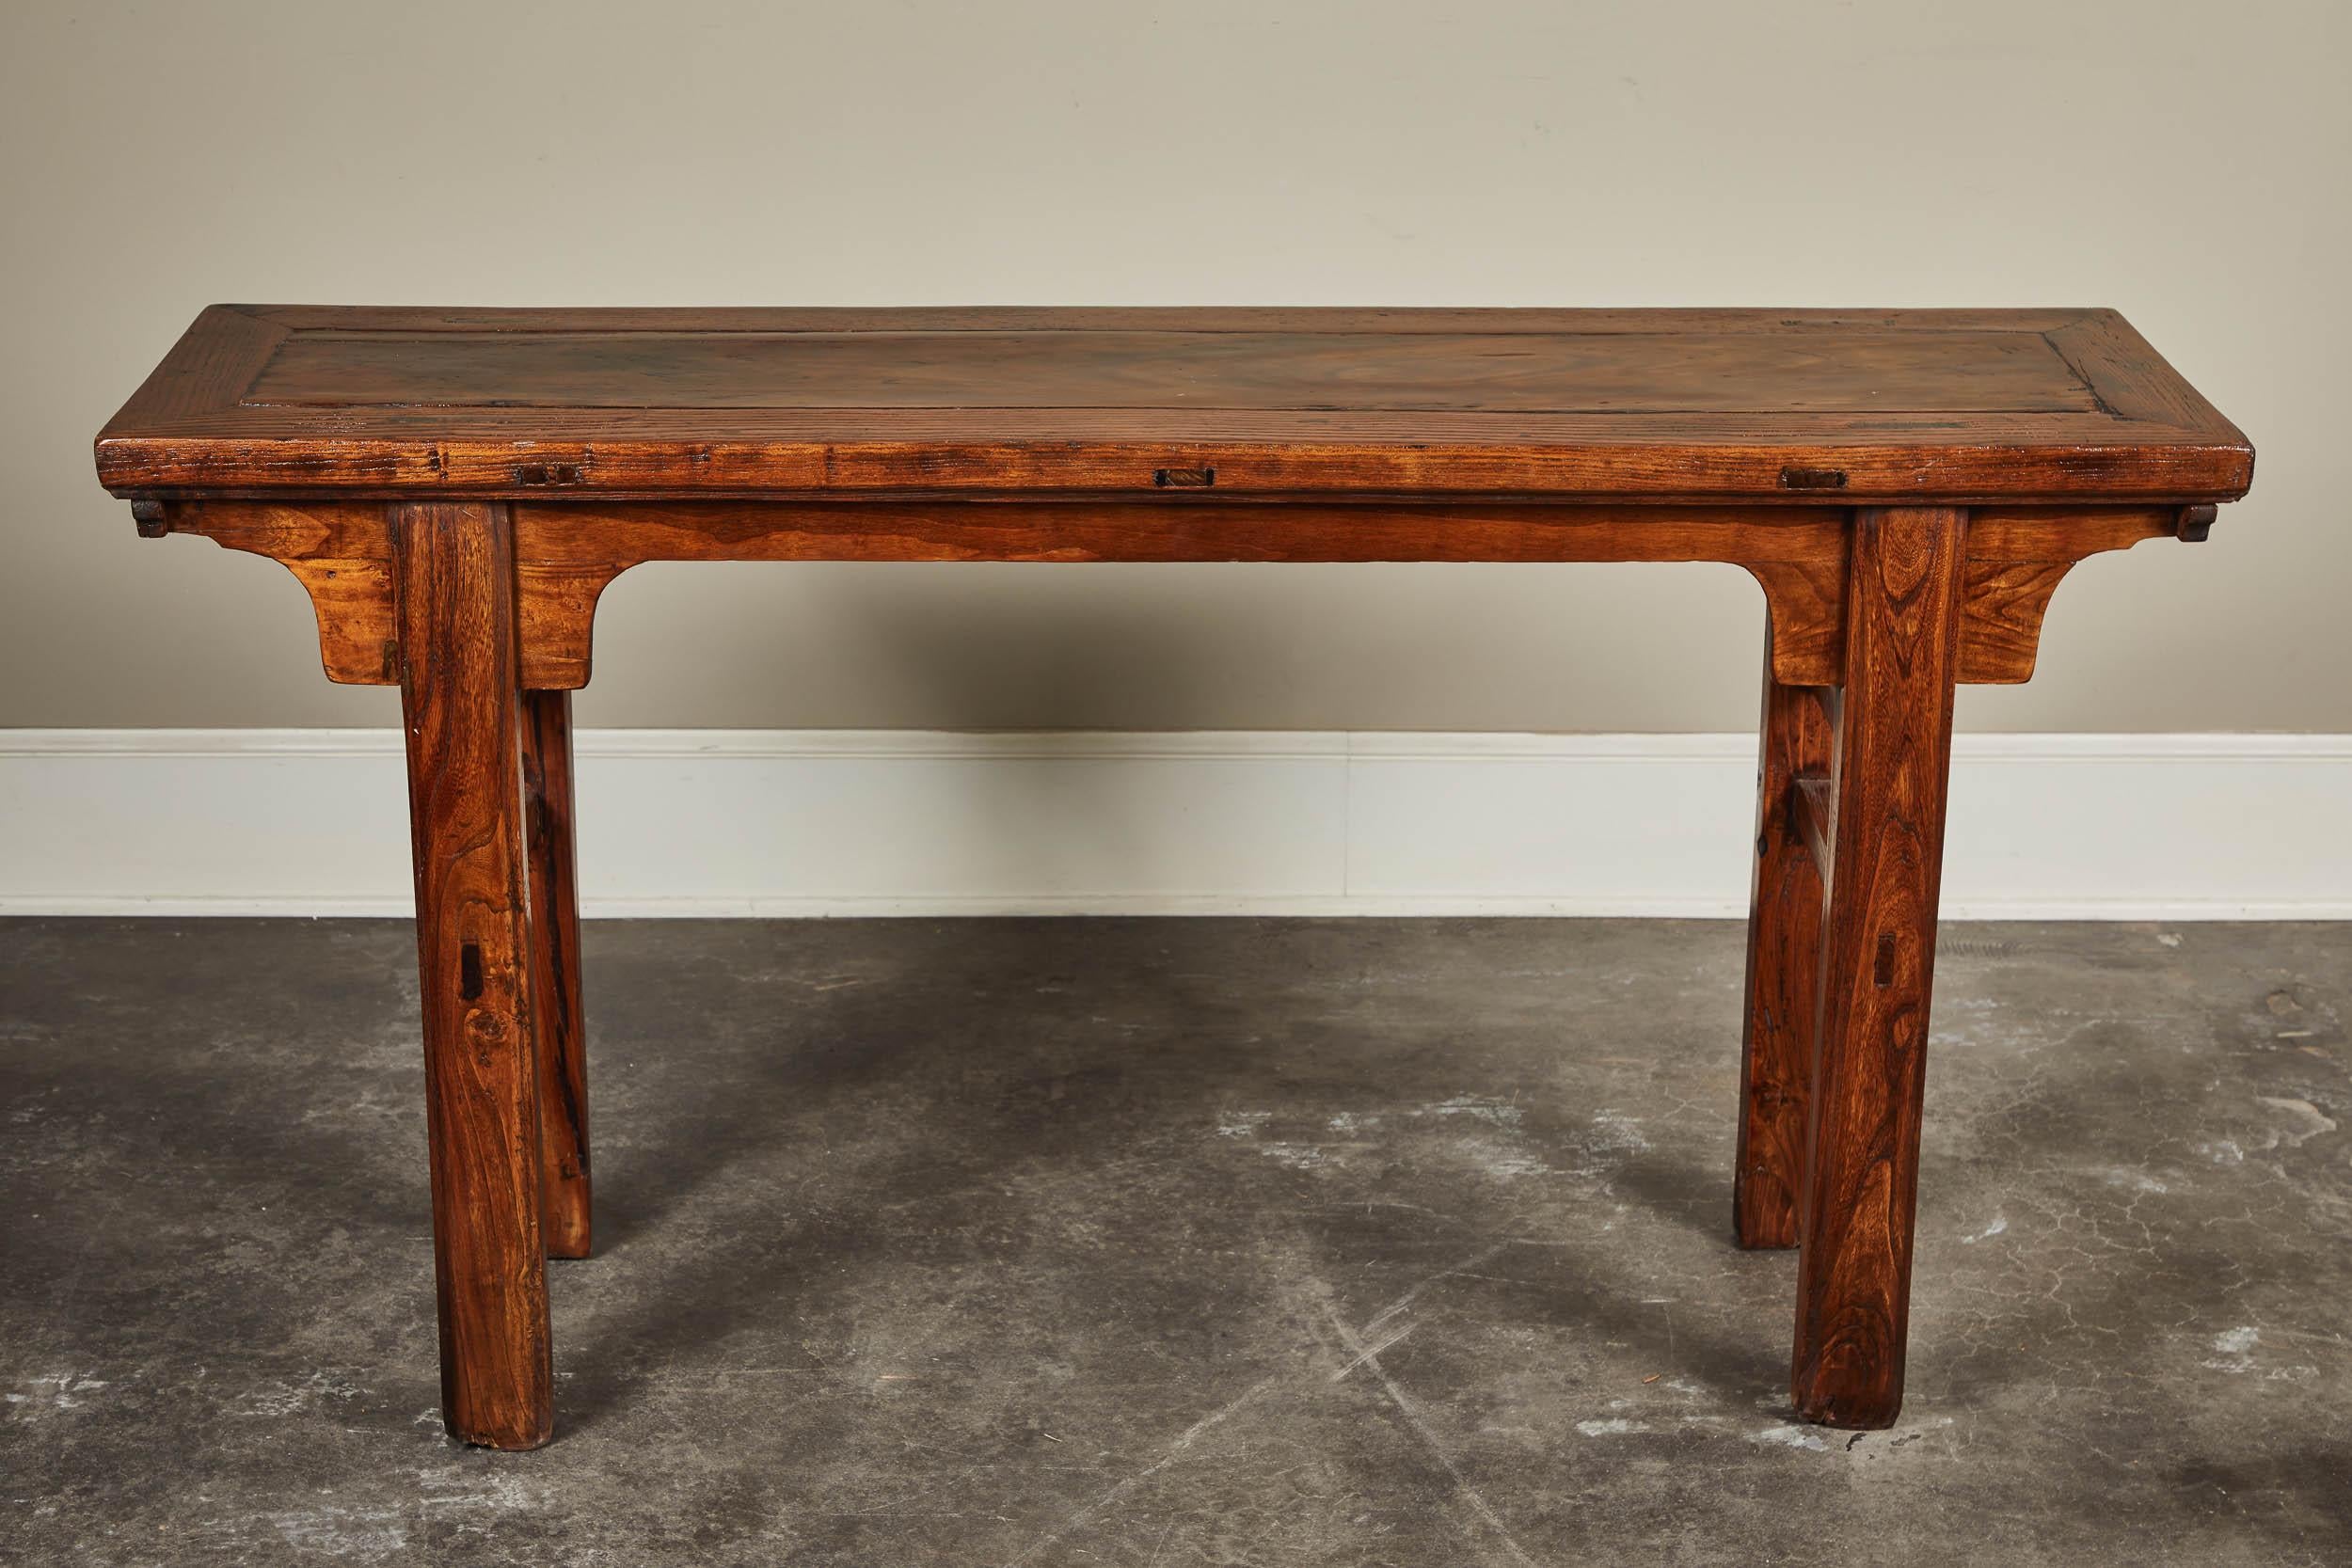 A 19th century Chinese Ming-style altar table made of elm. From Hebei.